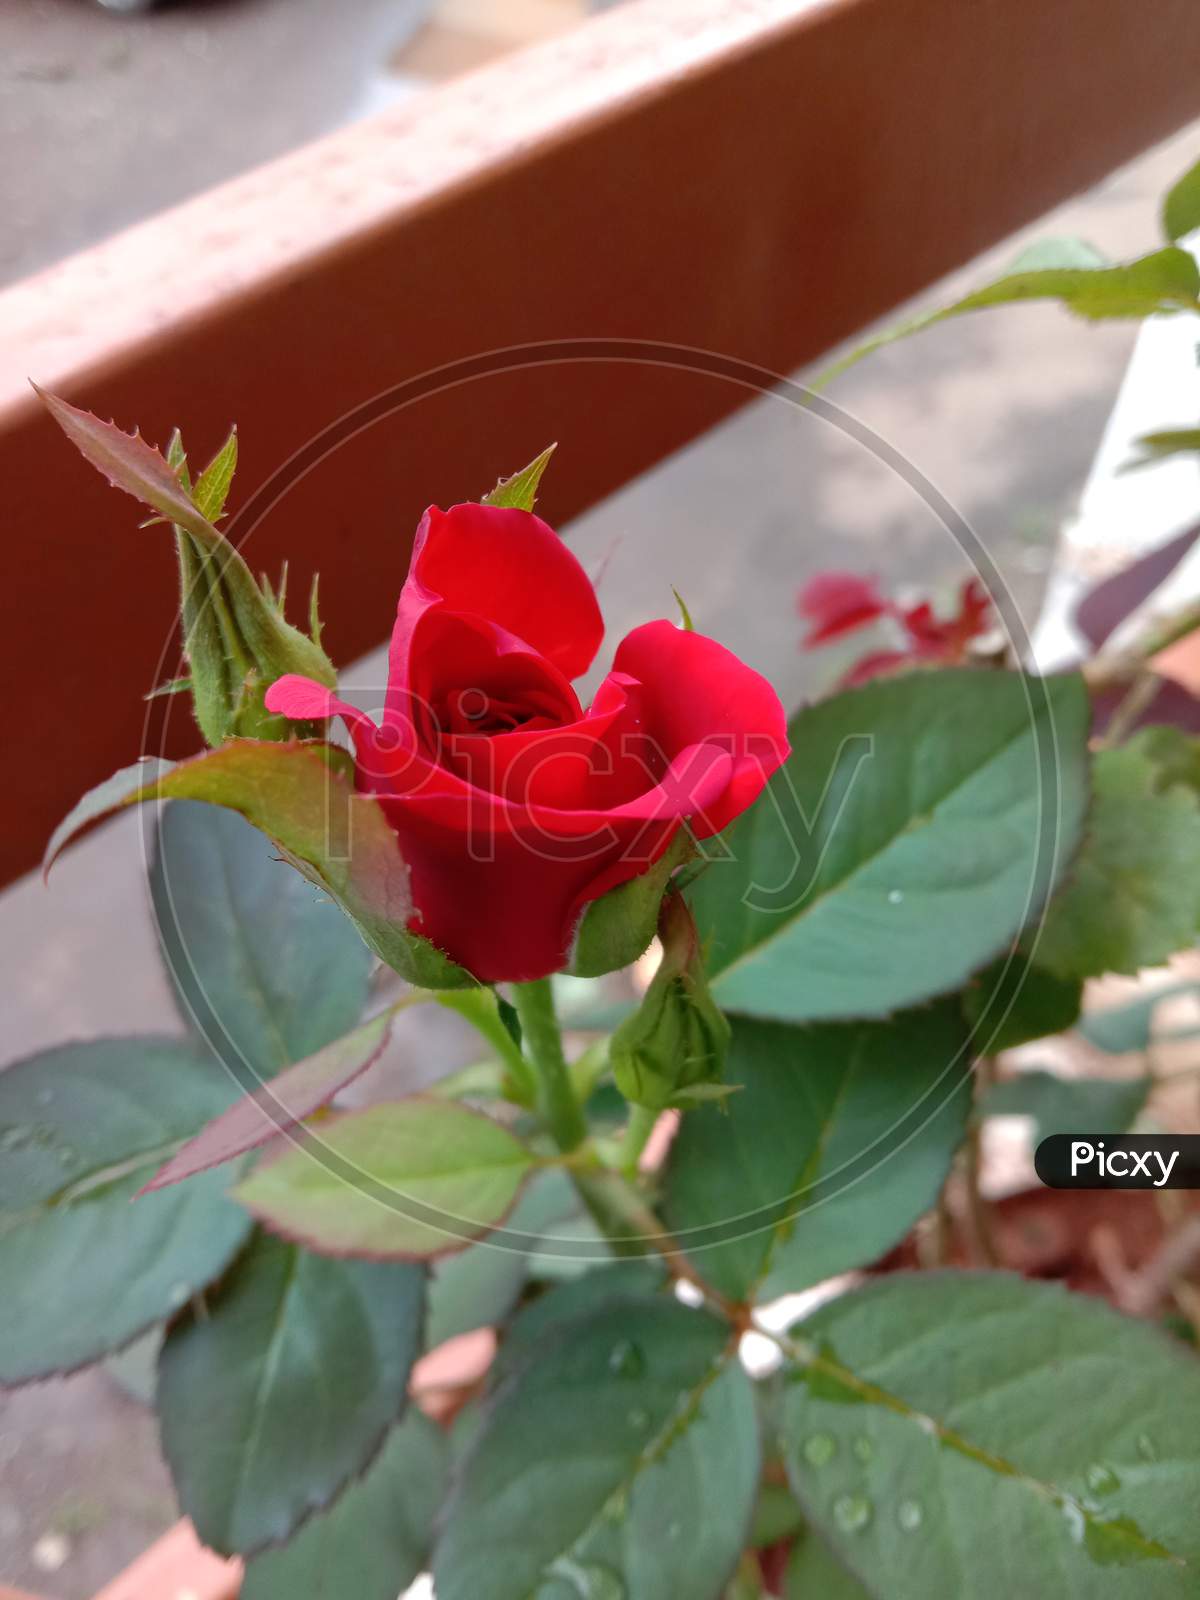 Very Beautiful red Rose